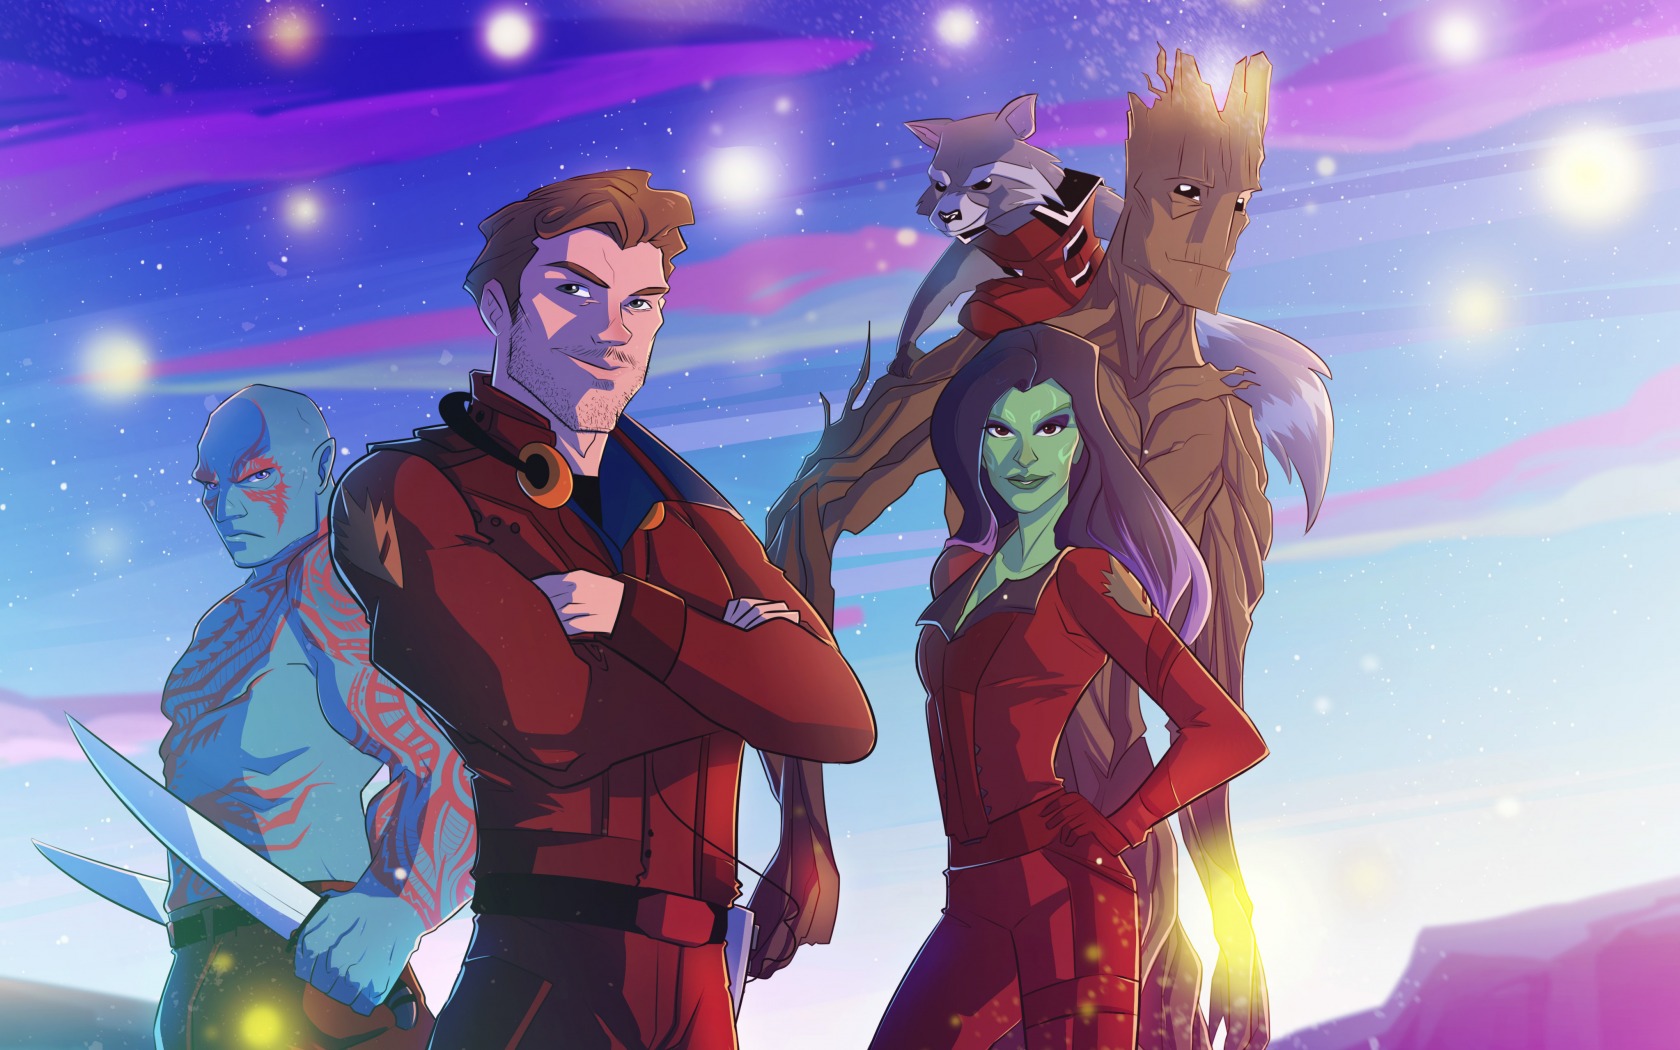 Drax The Destroyer Gamora Groot Marvel 039 S Guardians Of The Galaxy Peter Quill Rocket Raccoon 1680x1050